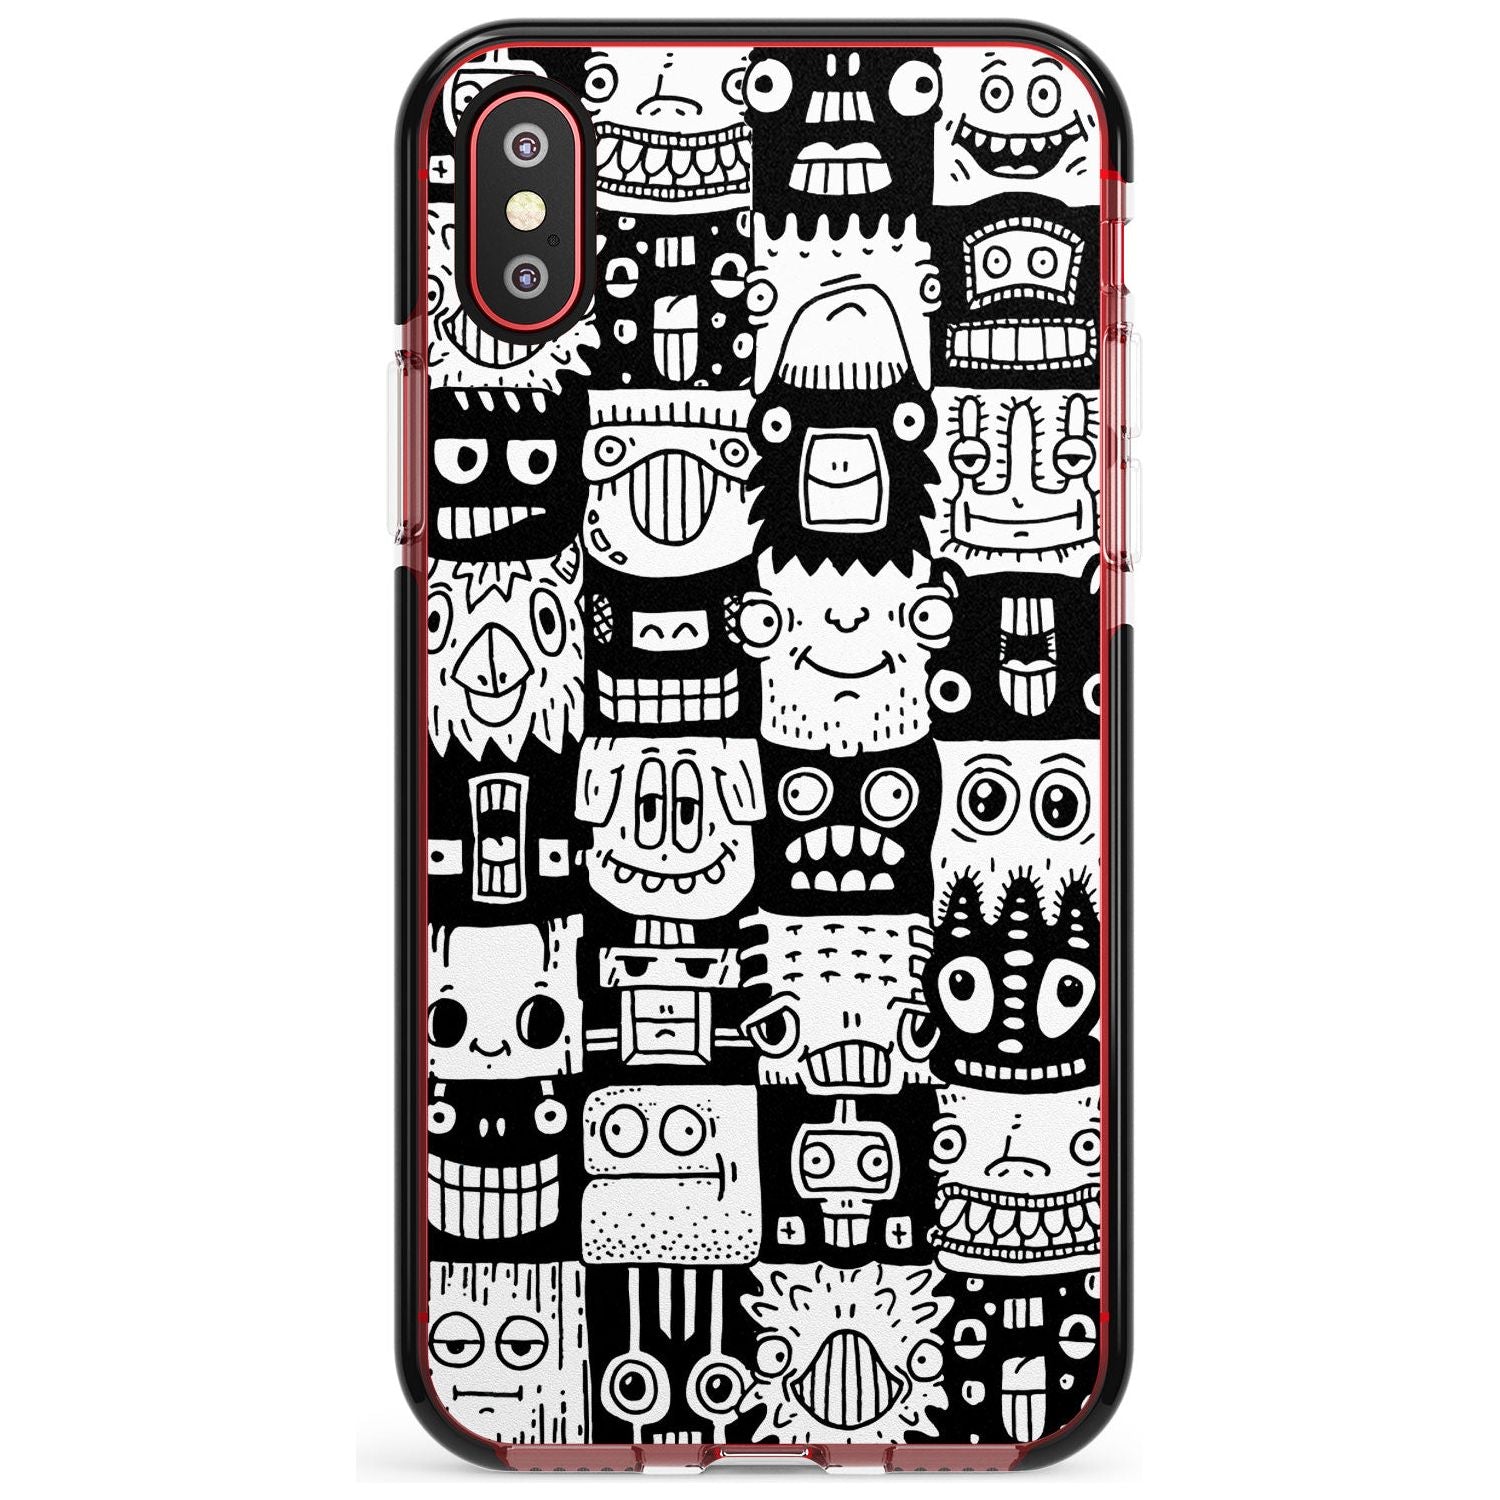 Checkerboard Heads Black Impact Phone Case for iPhone X XS Max XR